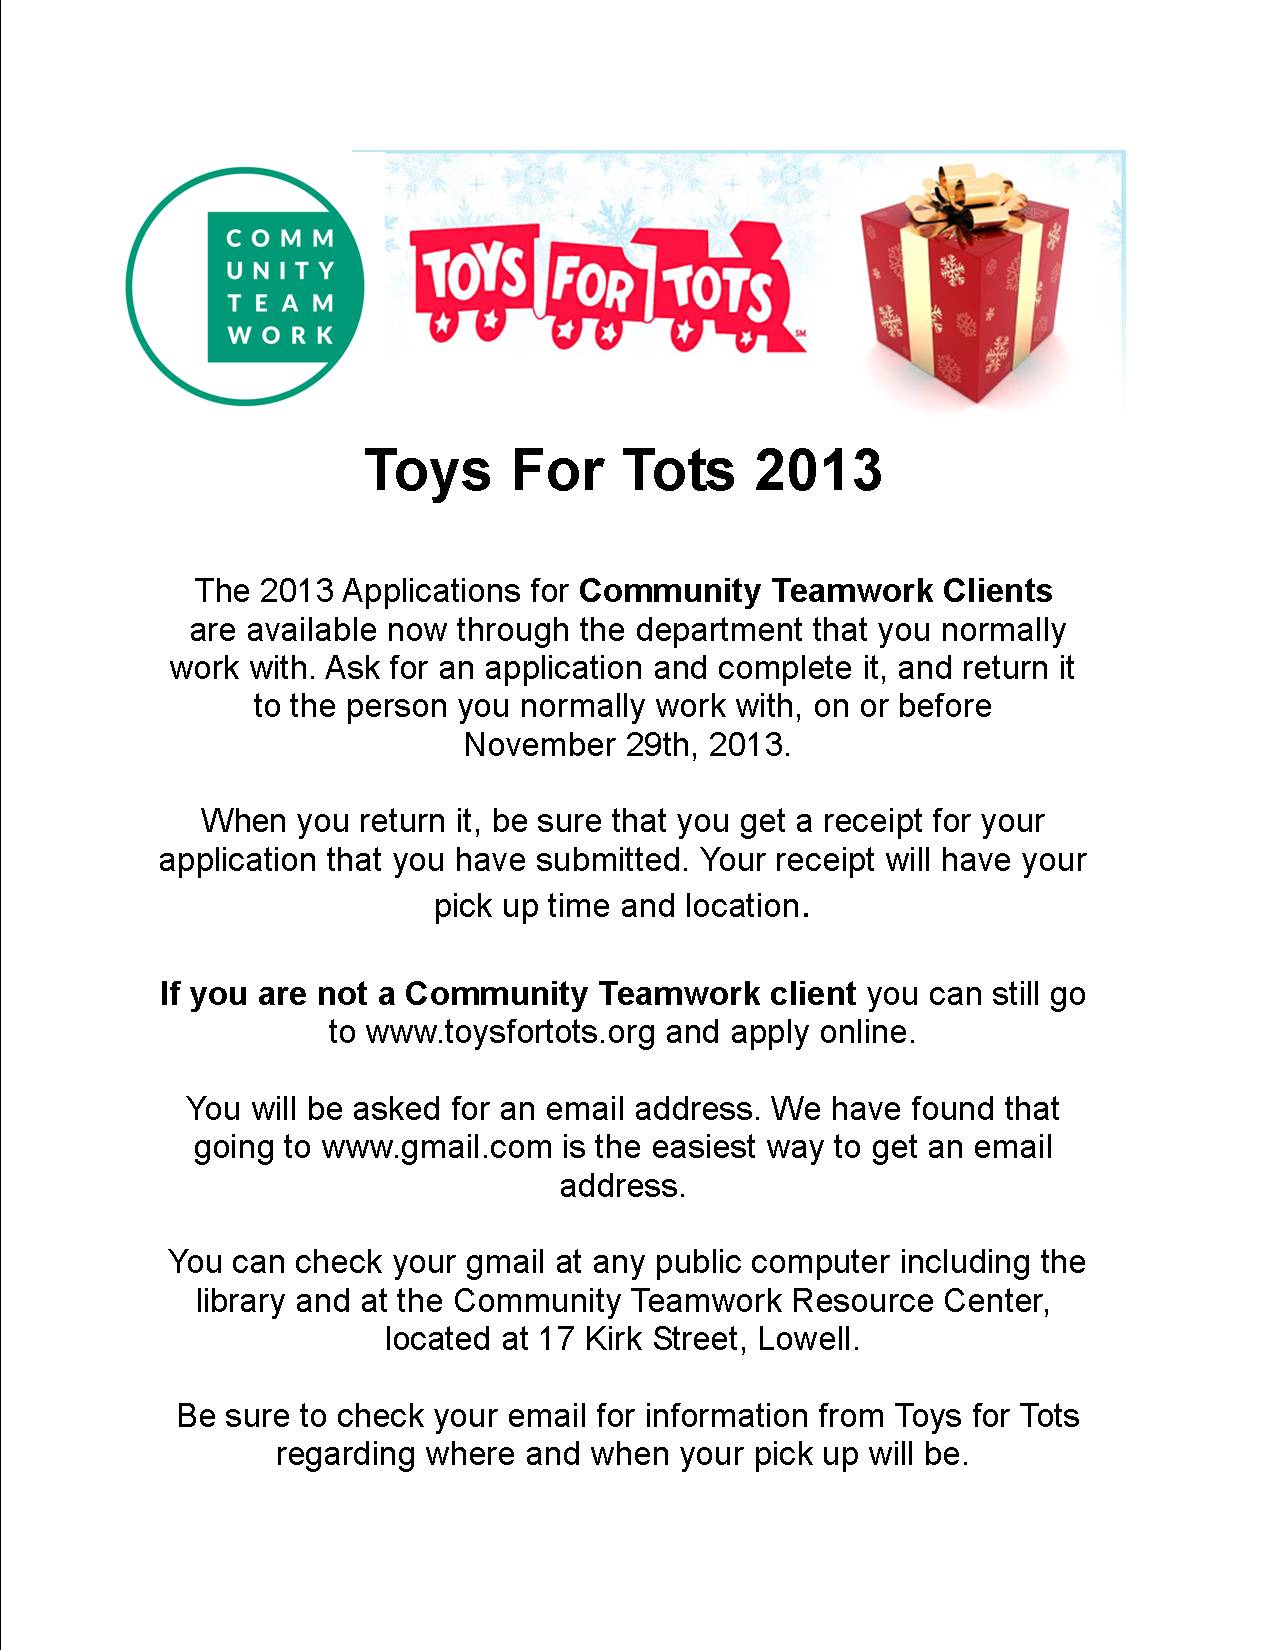 Toys for Tots Community Teamwork